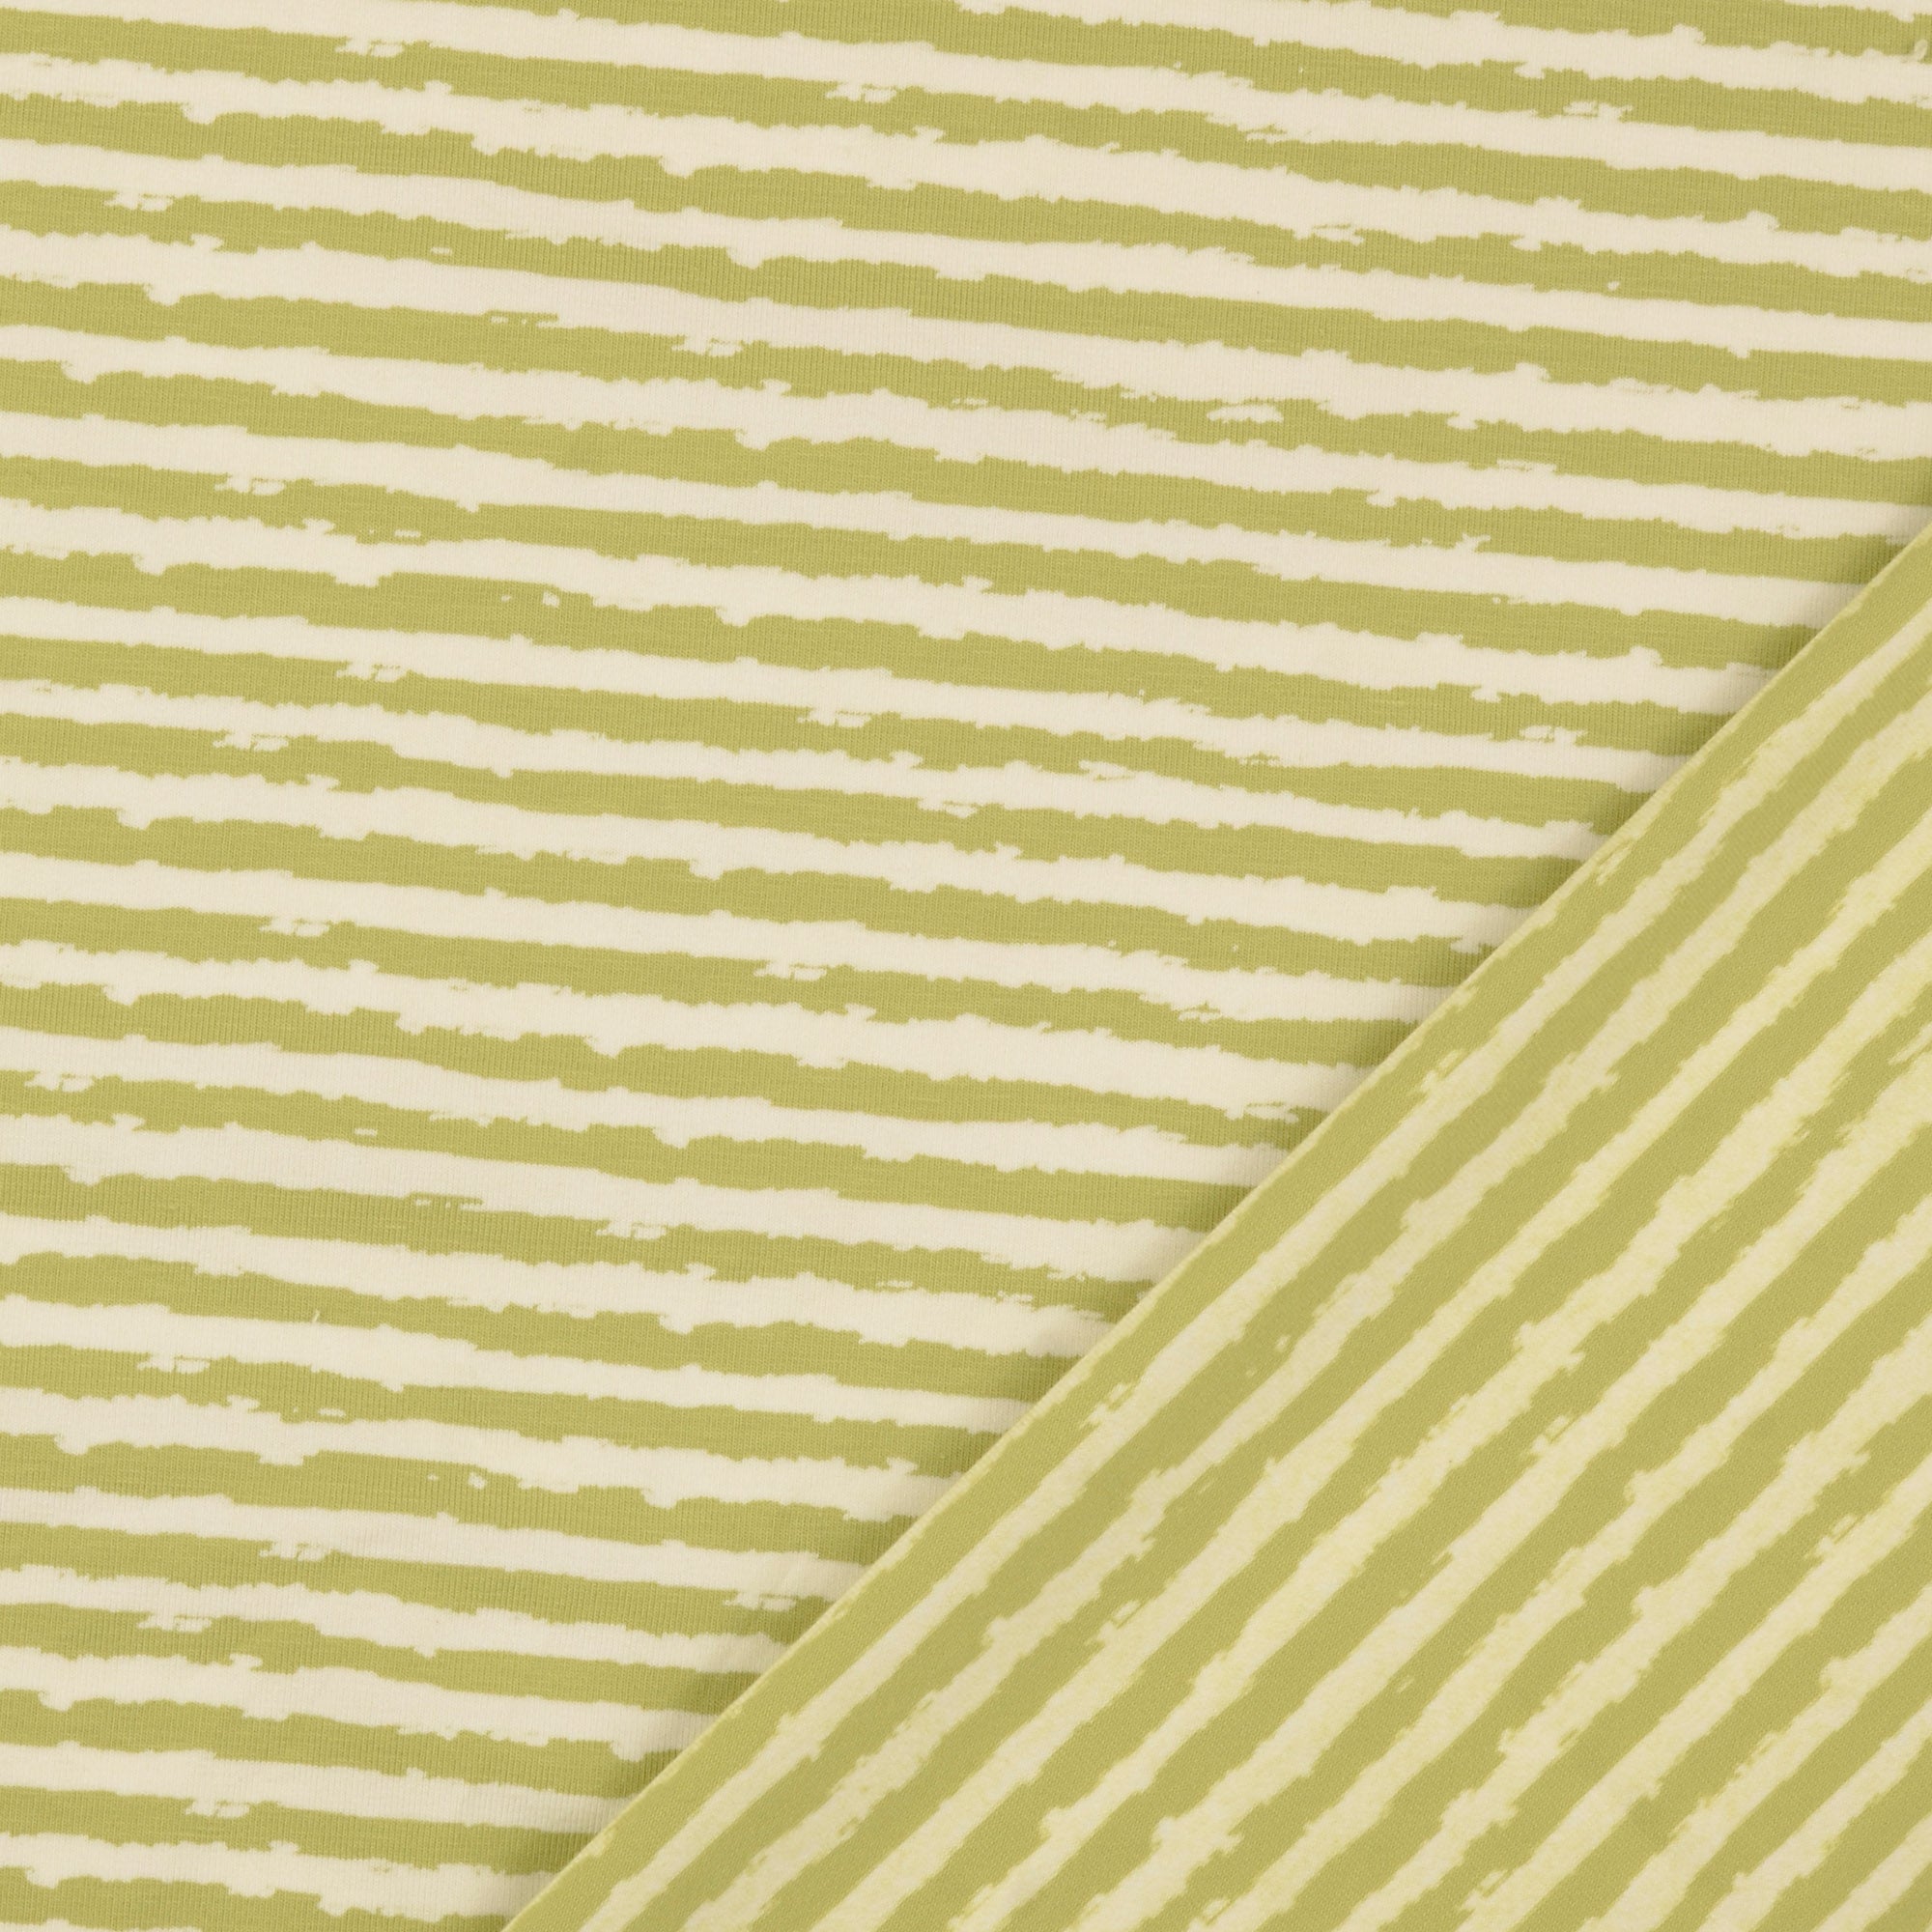 REMNANT 1.73 Metres - Hazy Thick Stripes Green Cotton Jersey Fabric